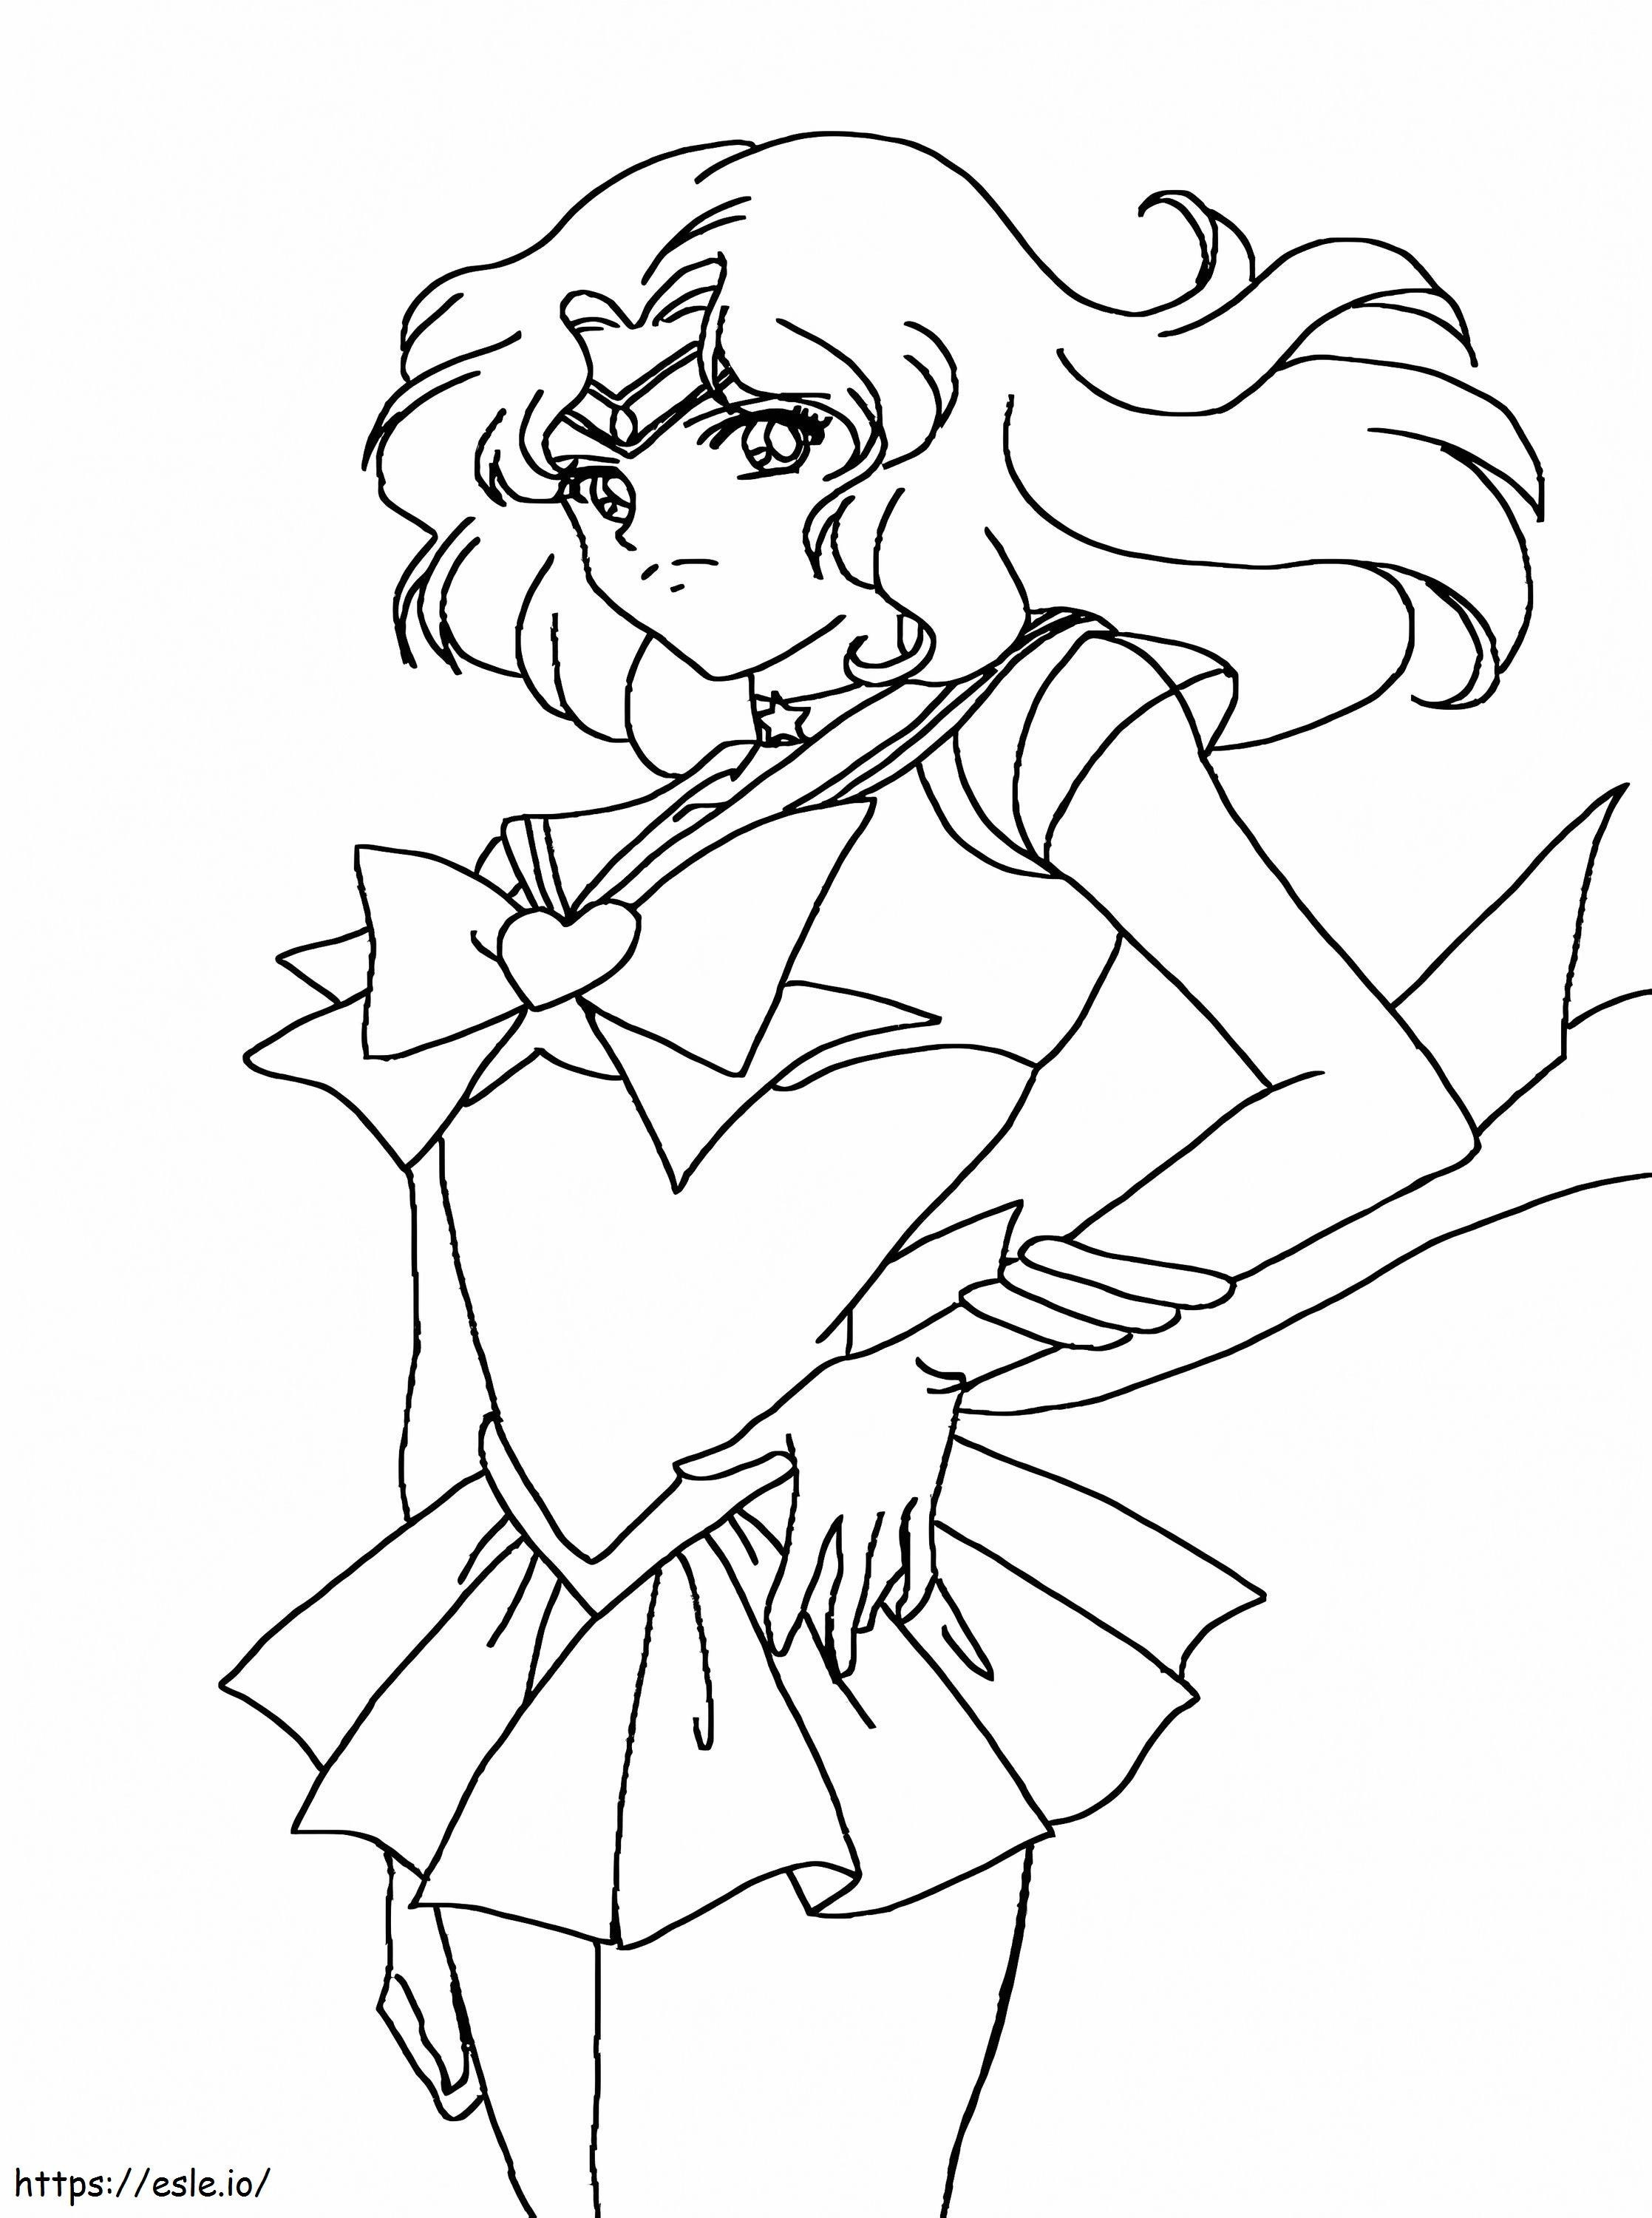 Sailor Neptune From Sailor Moon coloring page